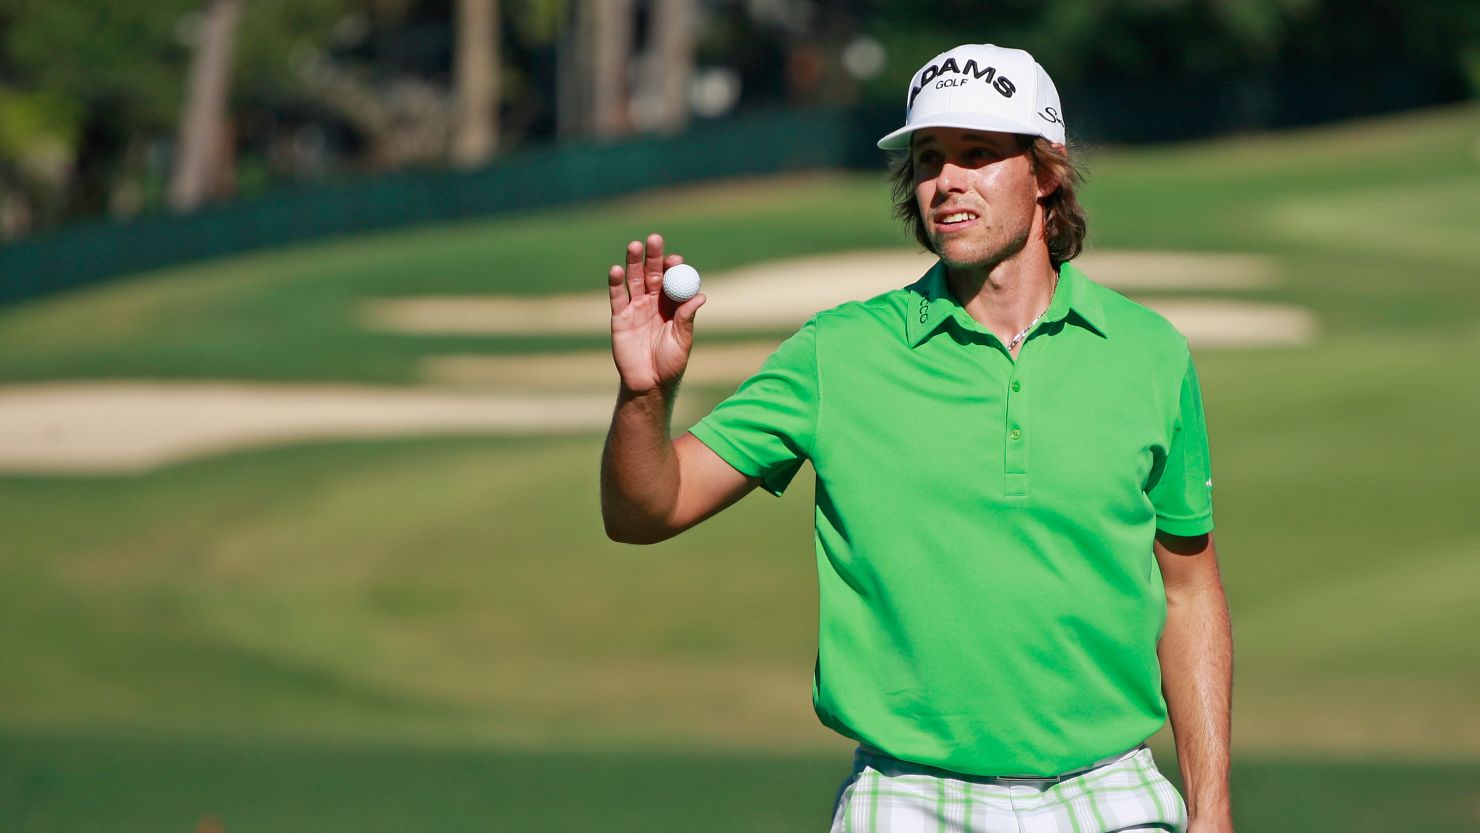 Australia's Aaron Baddeley moved into a share of the Tour Championship lead with a brilliant 64